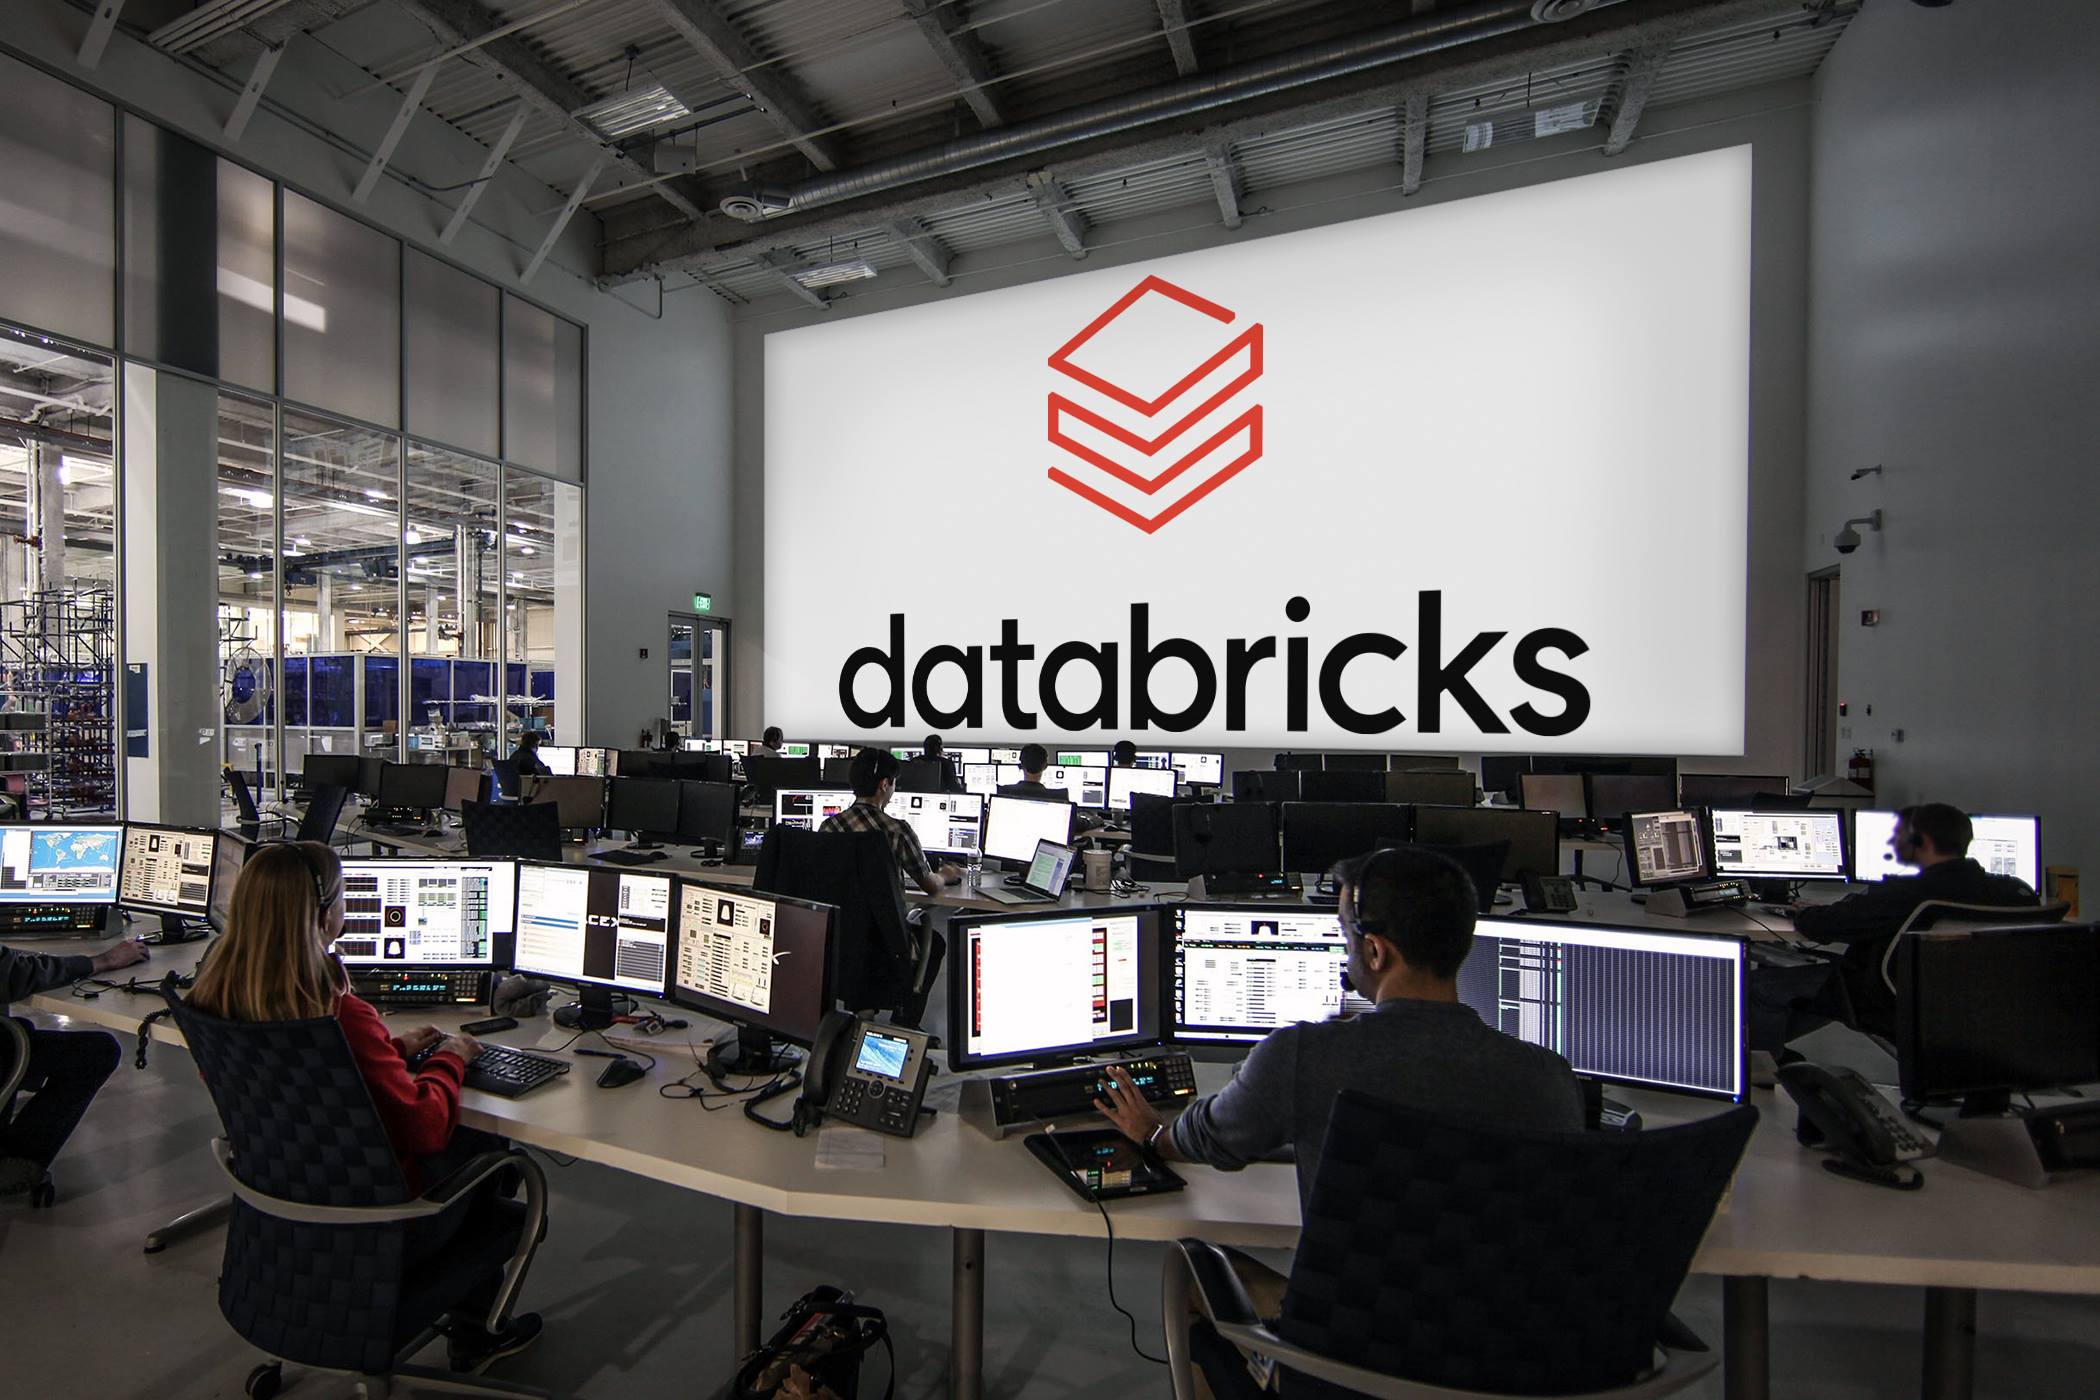 databricks-secures-500m-in-series-i-funding-valuation-reaches-43b-amid-late-stage-market-turmoil